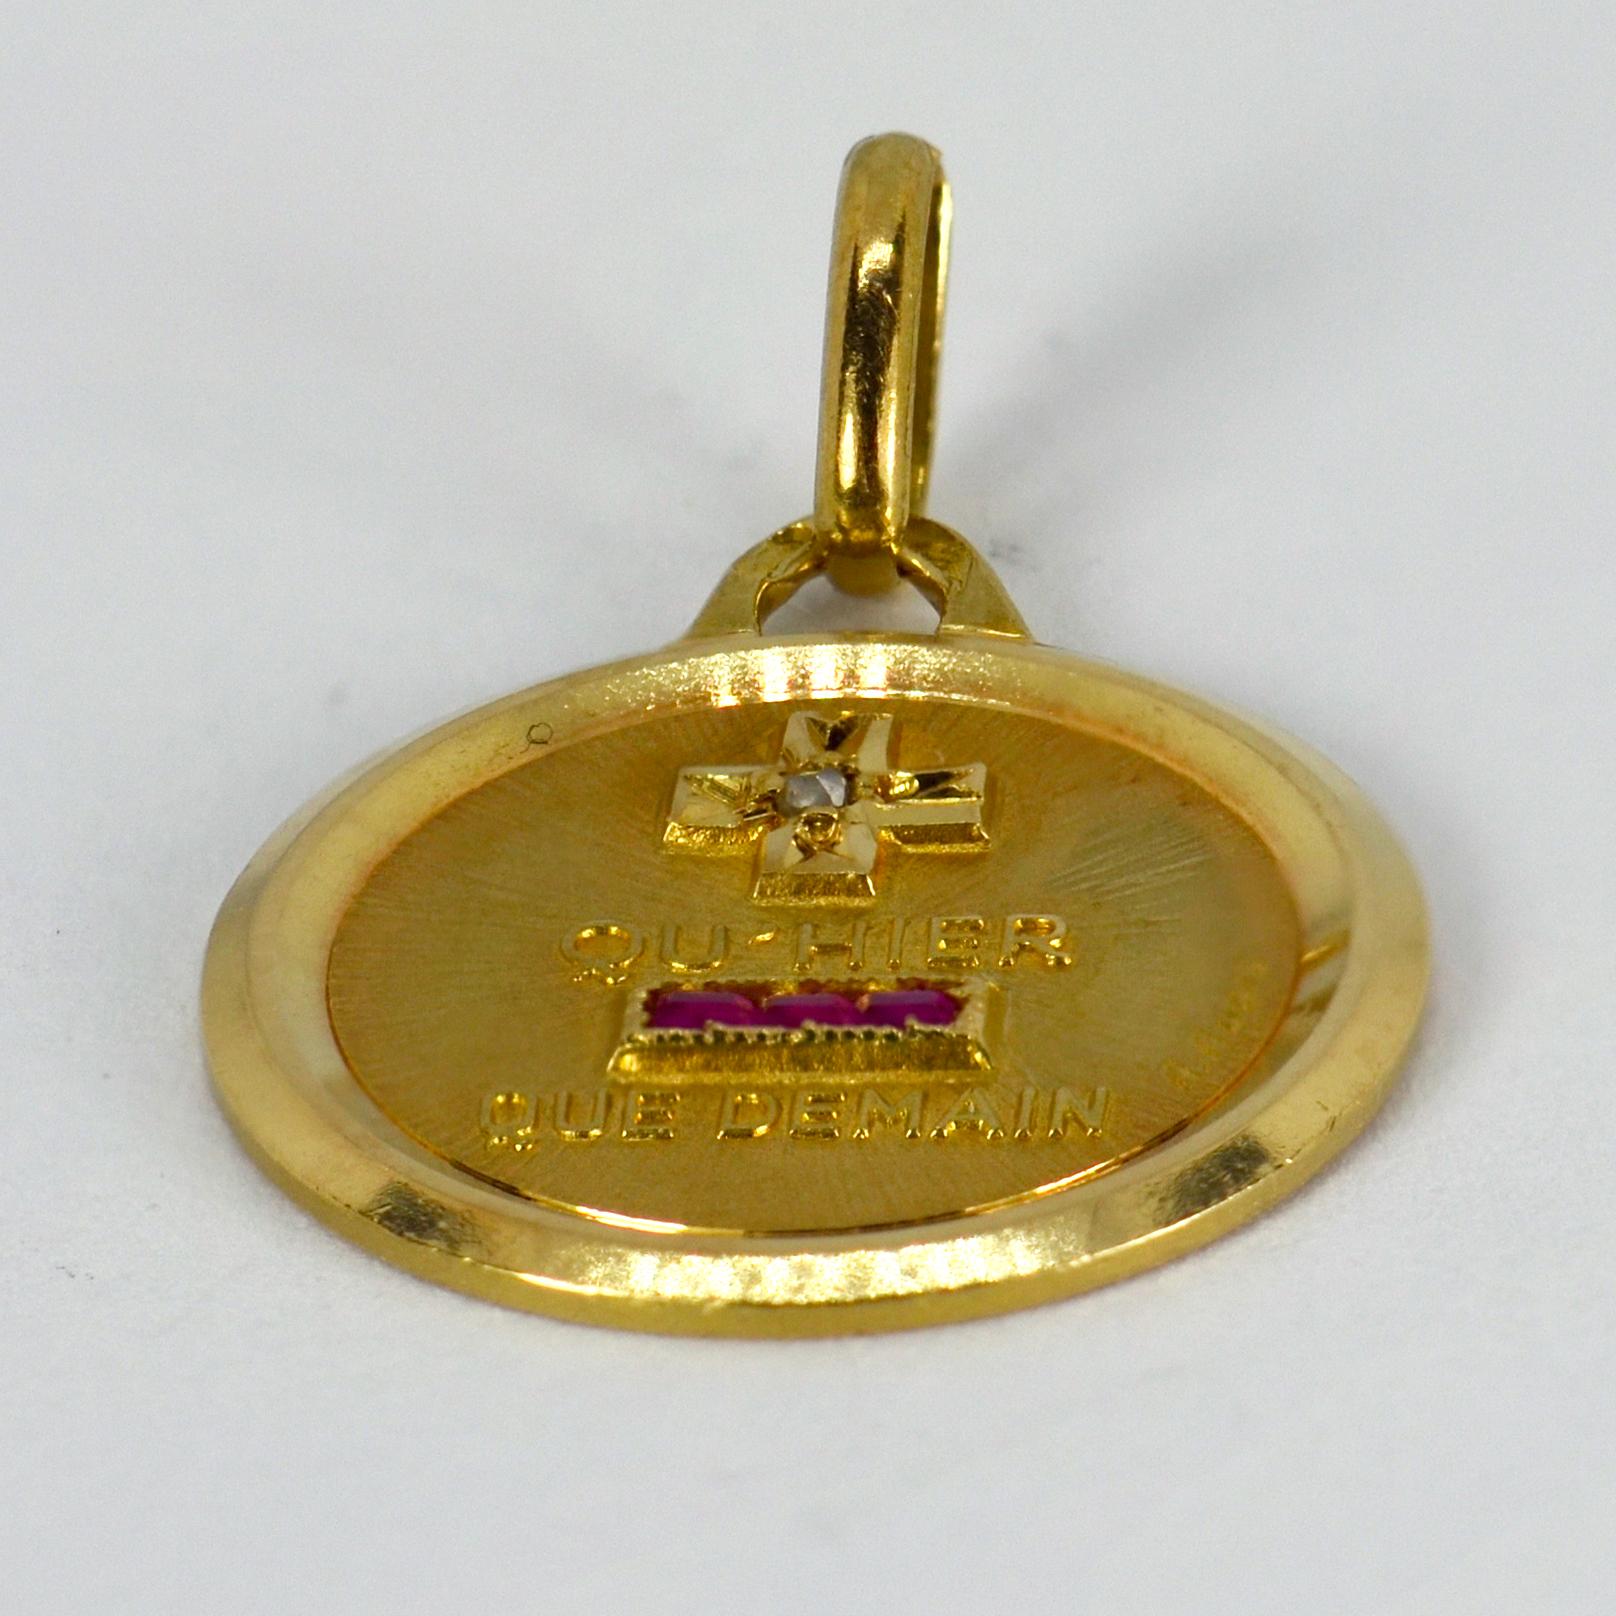 A French 18 karat (18K) yellow gold, diamond and ruby love charm pendant with a rebus spelling out 